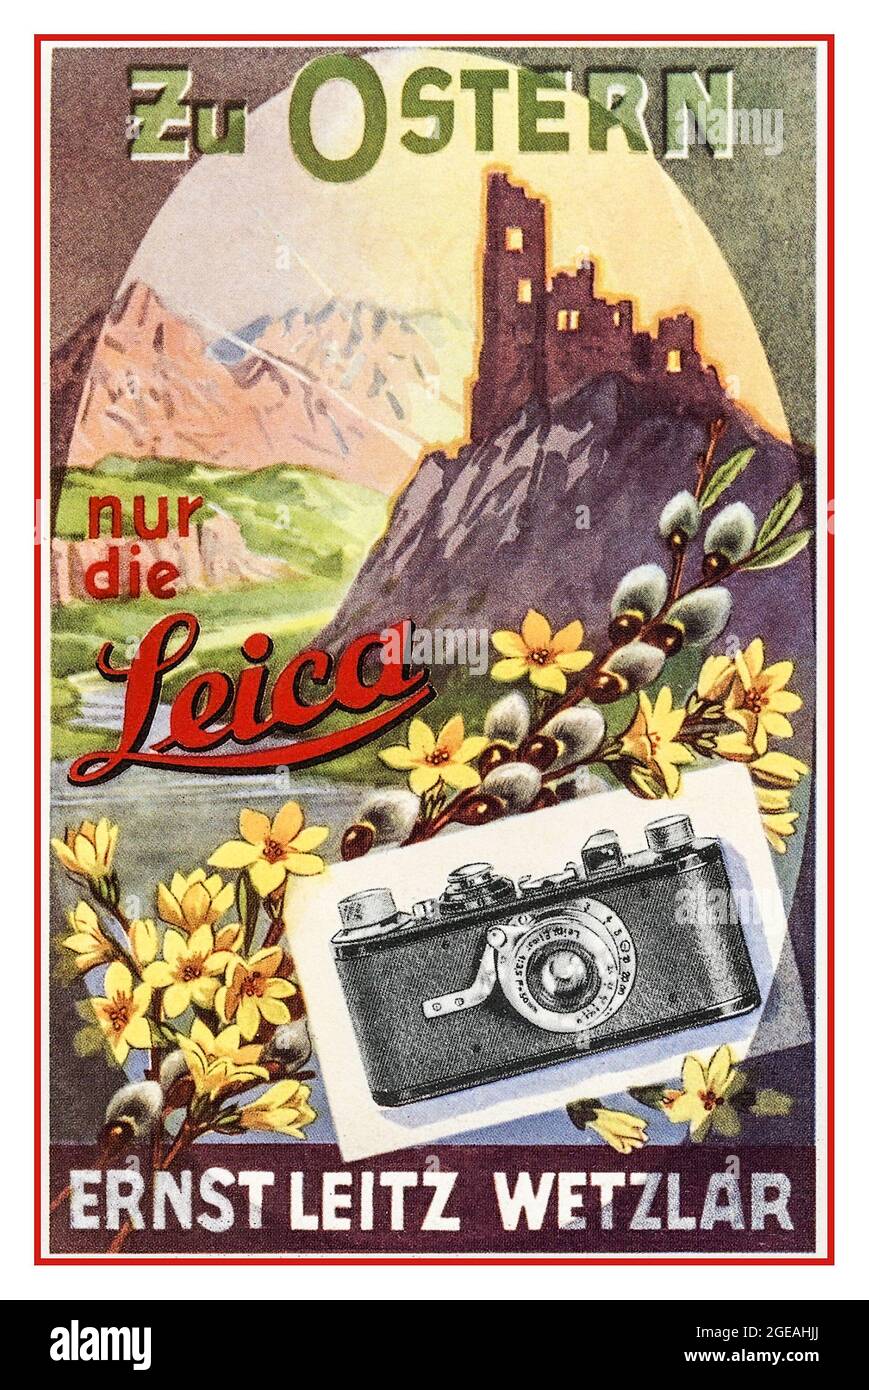 Vintage LEICA A 35mm camera 1920's press advertising poster 'Zu Ostern nur die Leica'. Only the Leica at Easter Stock Photo